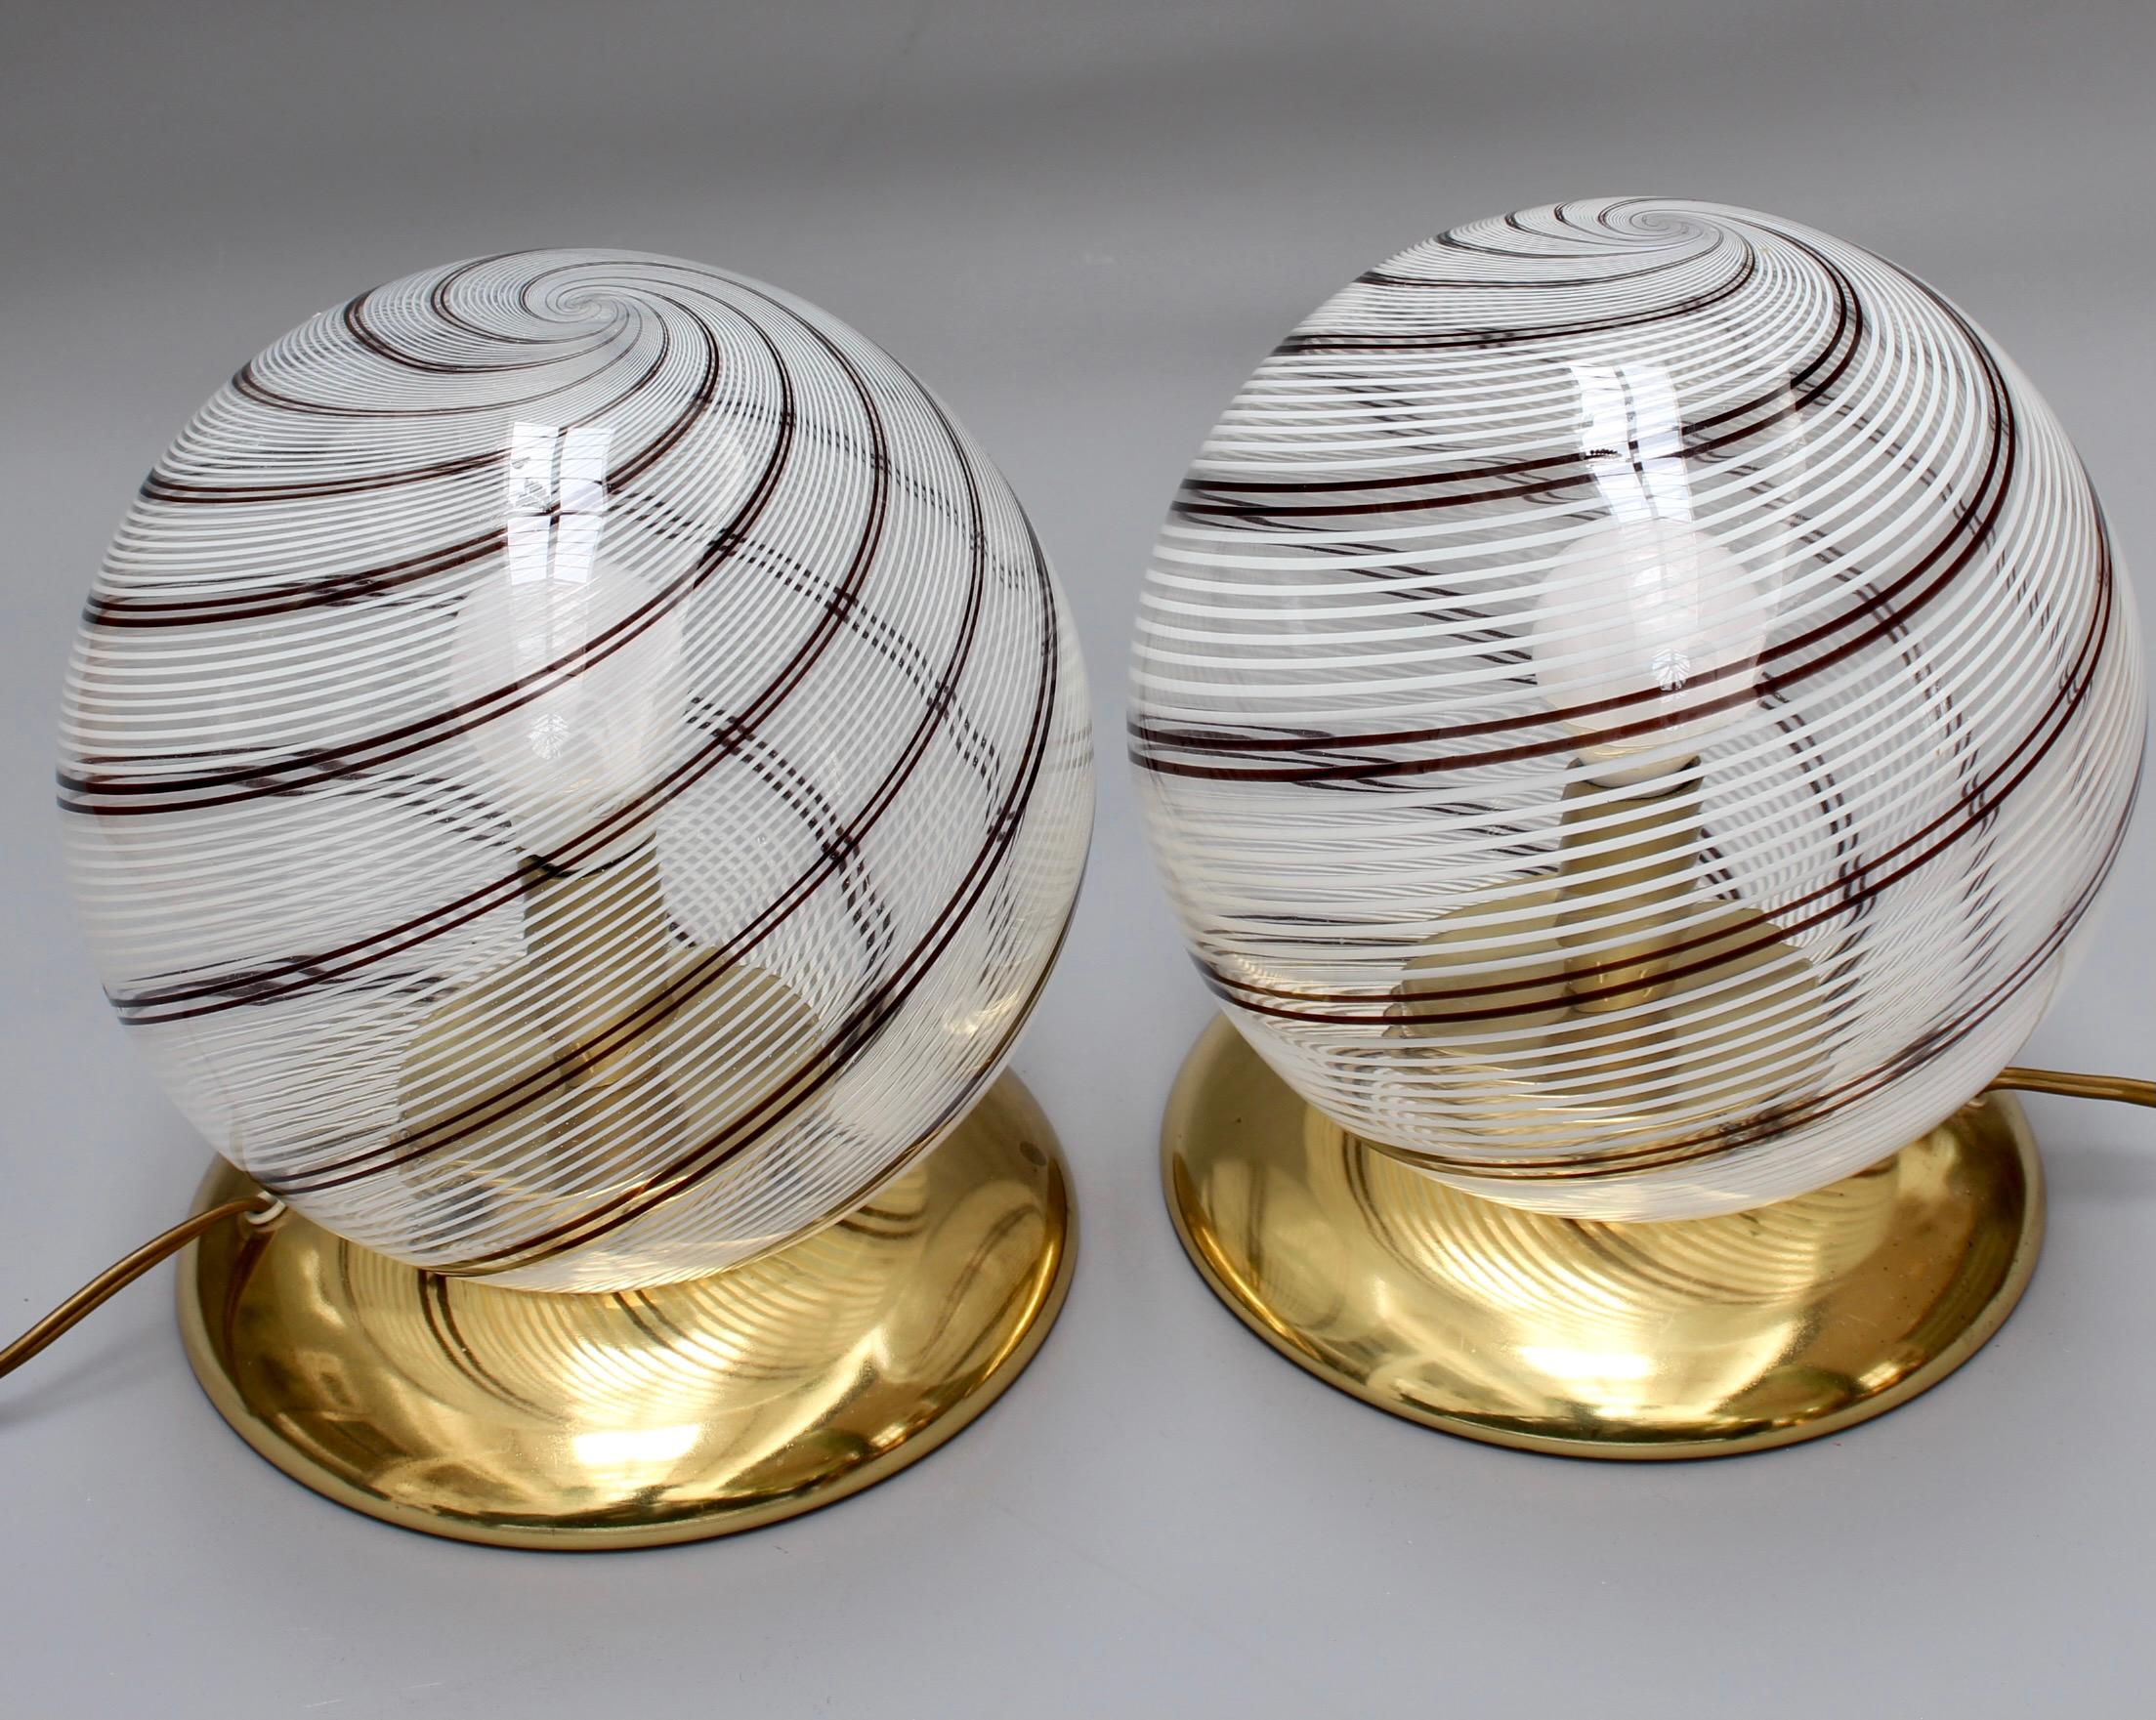 Pair of blown Murano clear glass globe table lamps (circa 1970s) in the style of Paulo Venini. Modernist and elegant, these blown glass globe lamps provide a source of lighting which is both functional and decorative. The stripe effect was ahead of